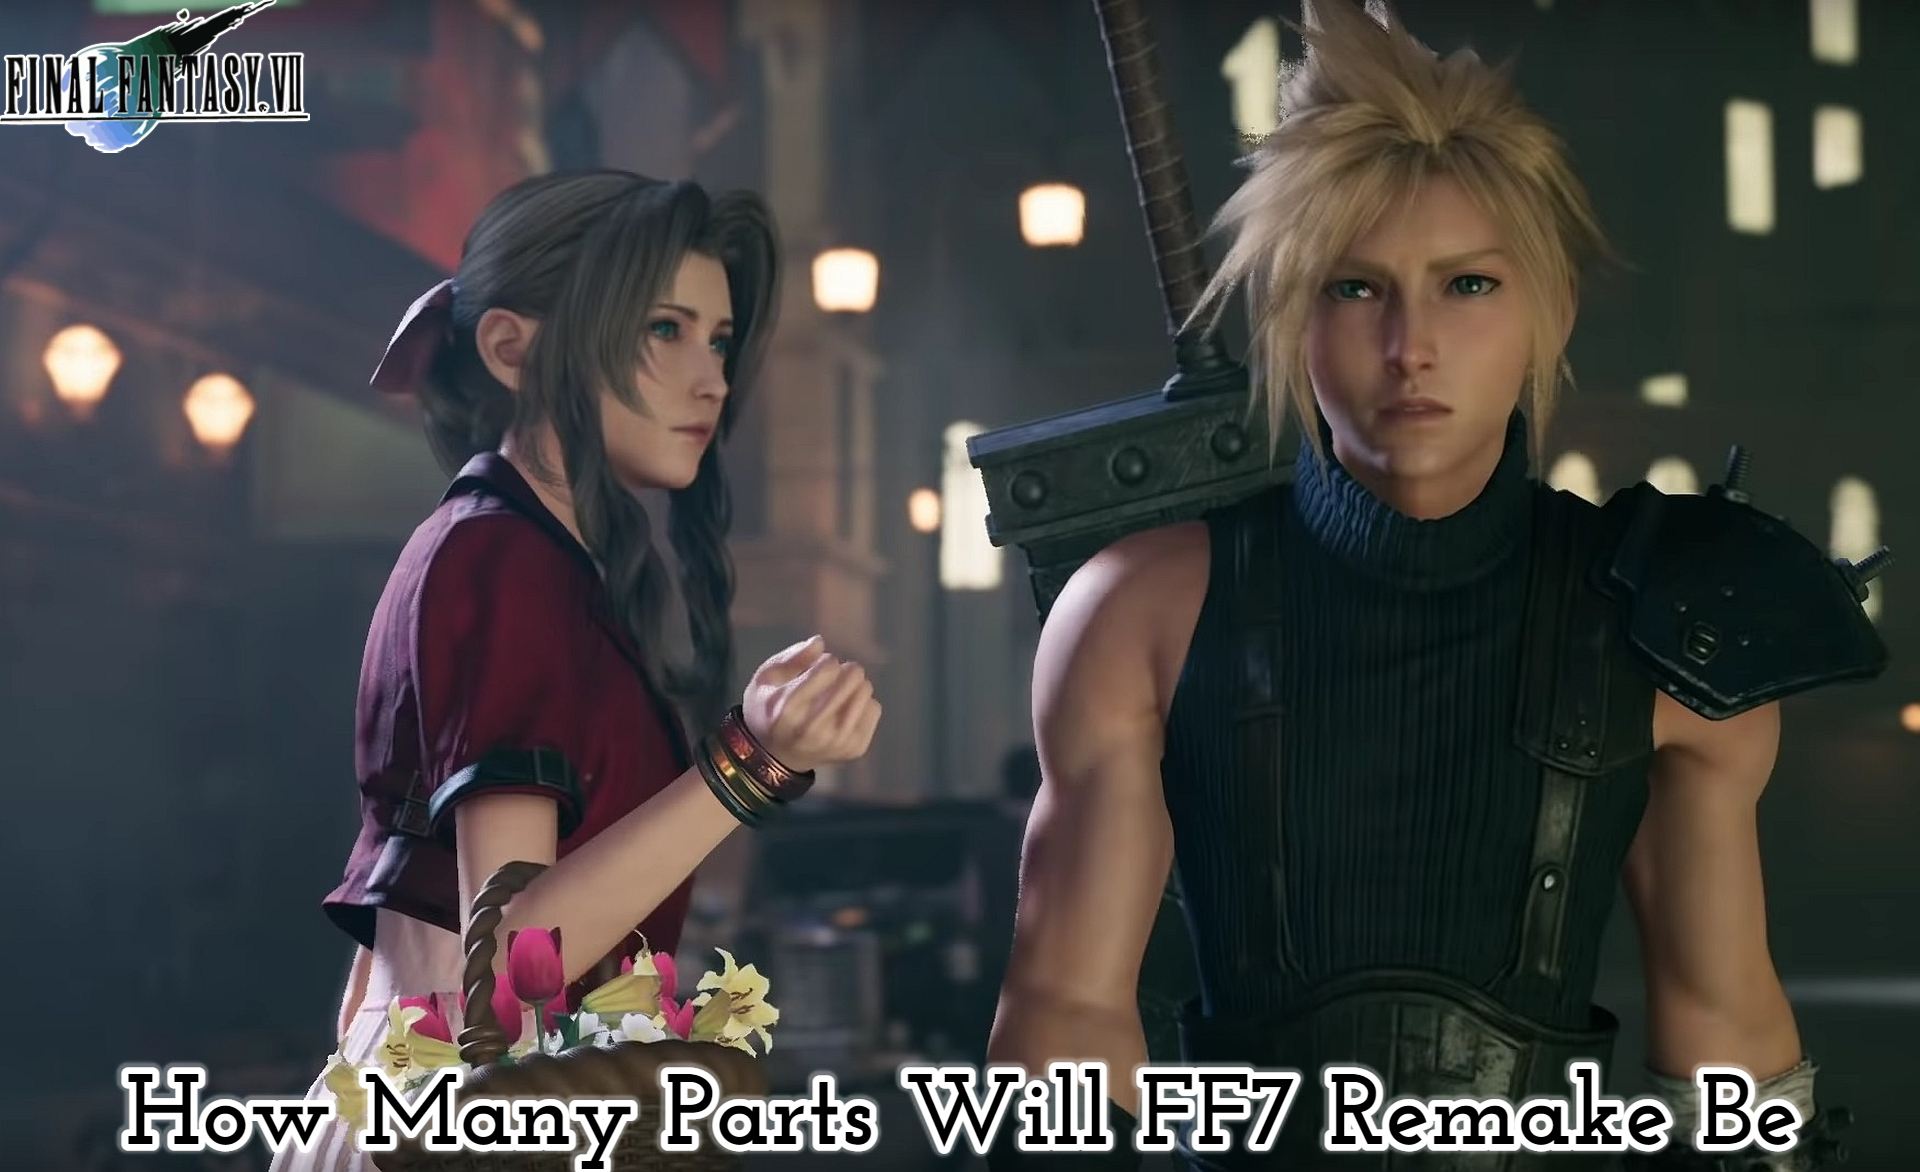 You are currently viewing How Many Parts Will FF7 Remake Be